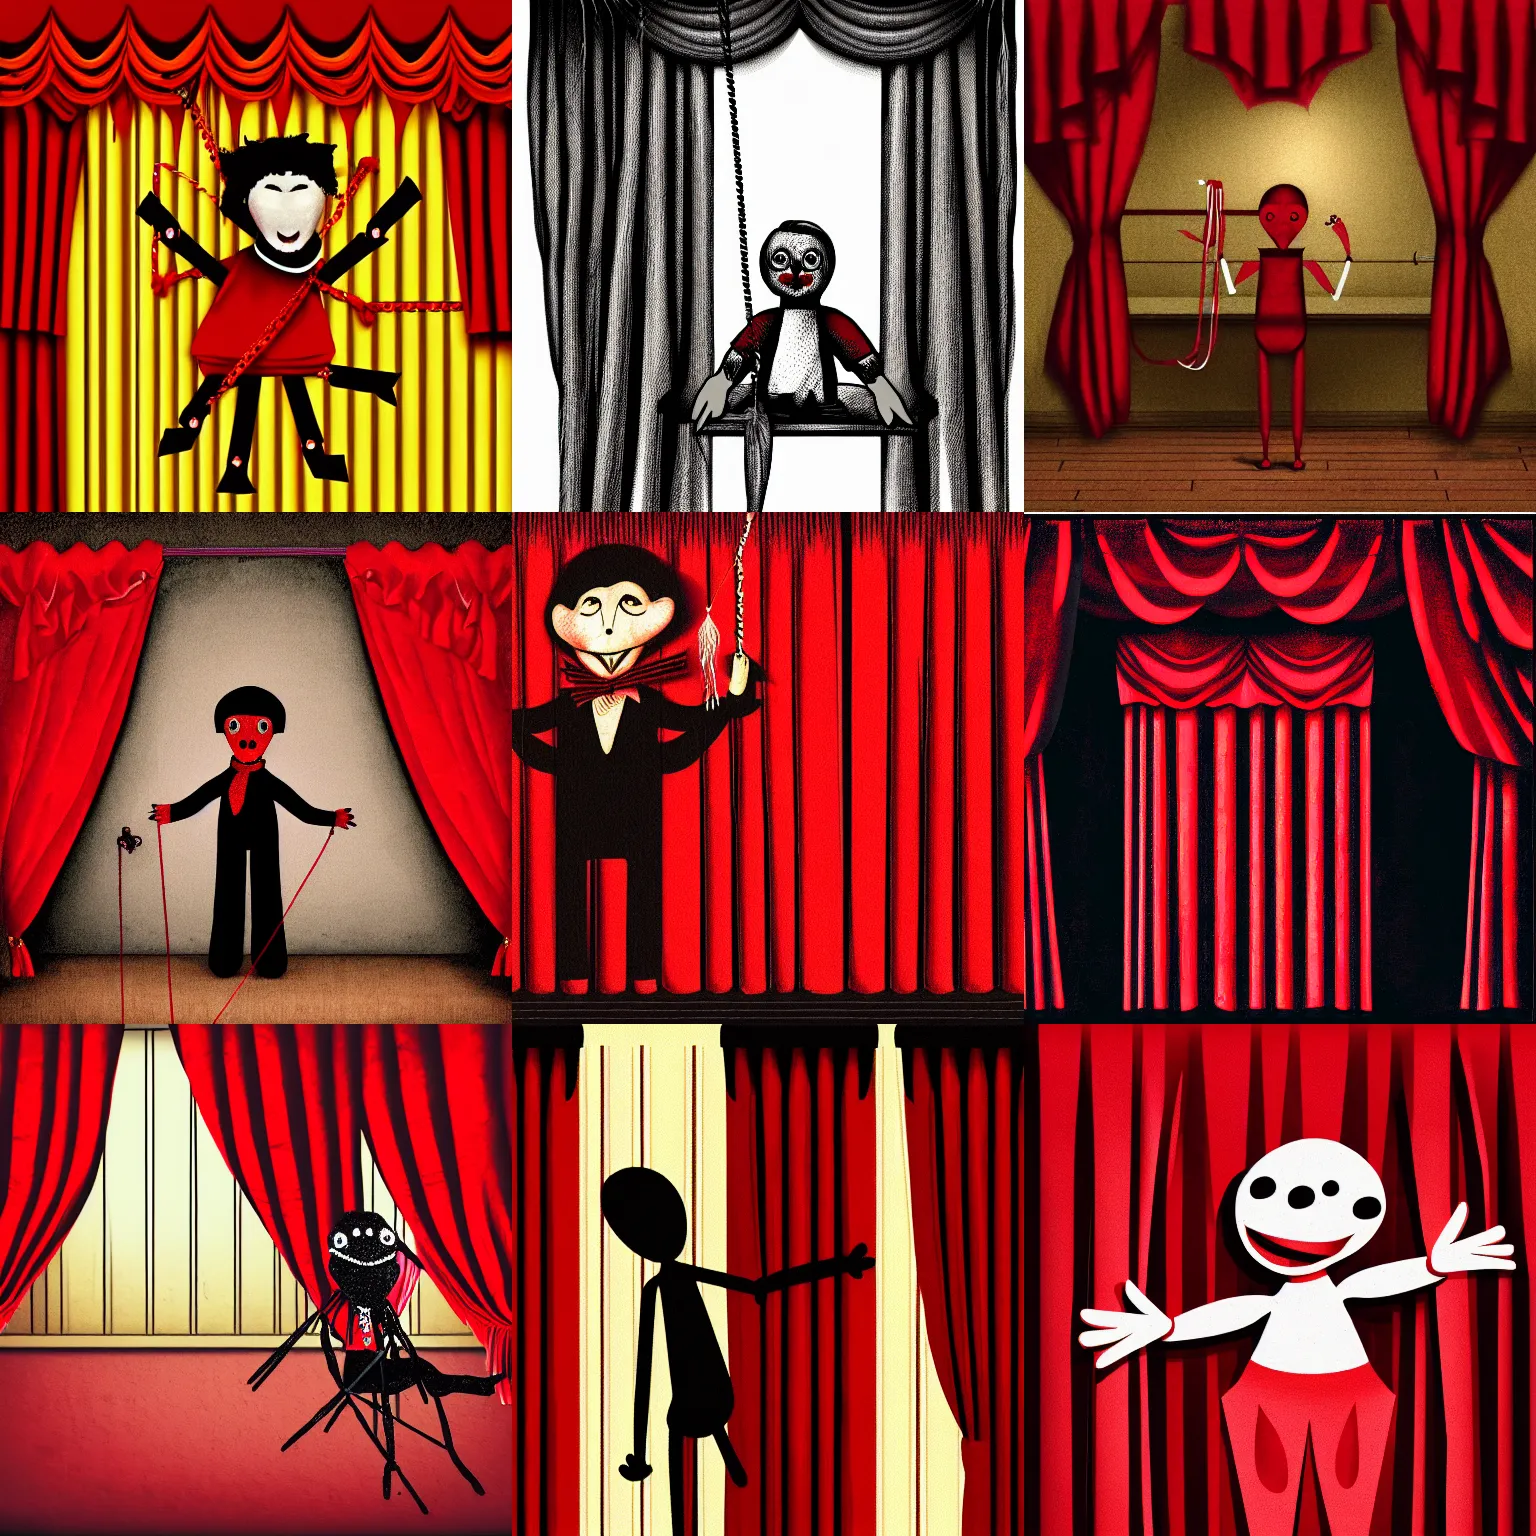 Prompt: Illustration of a puppet on strings, red curtains, details visible, highly detailed, very dark ambiance, album cover